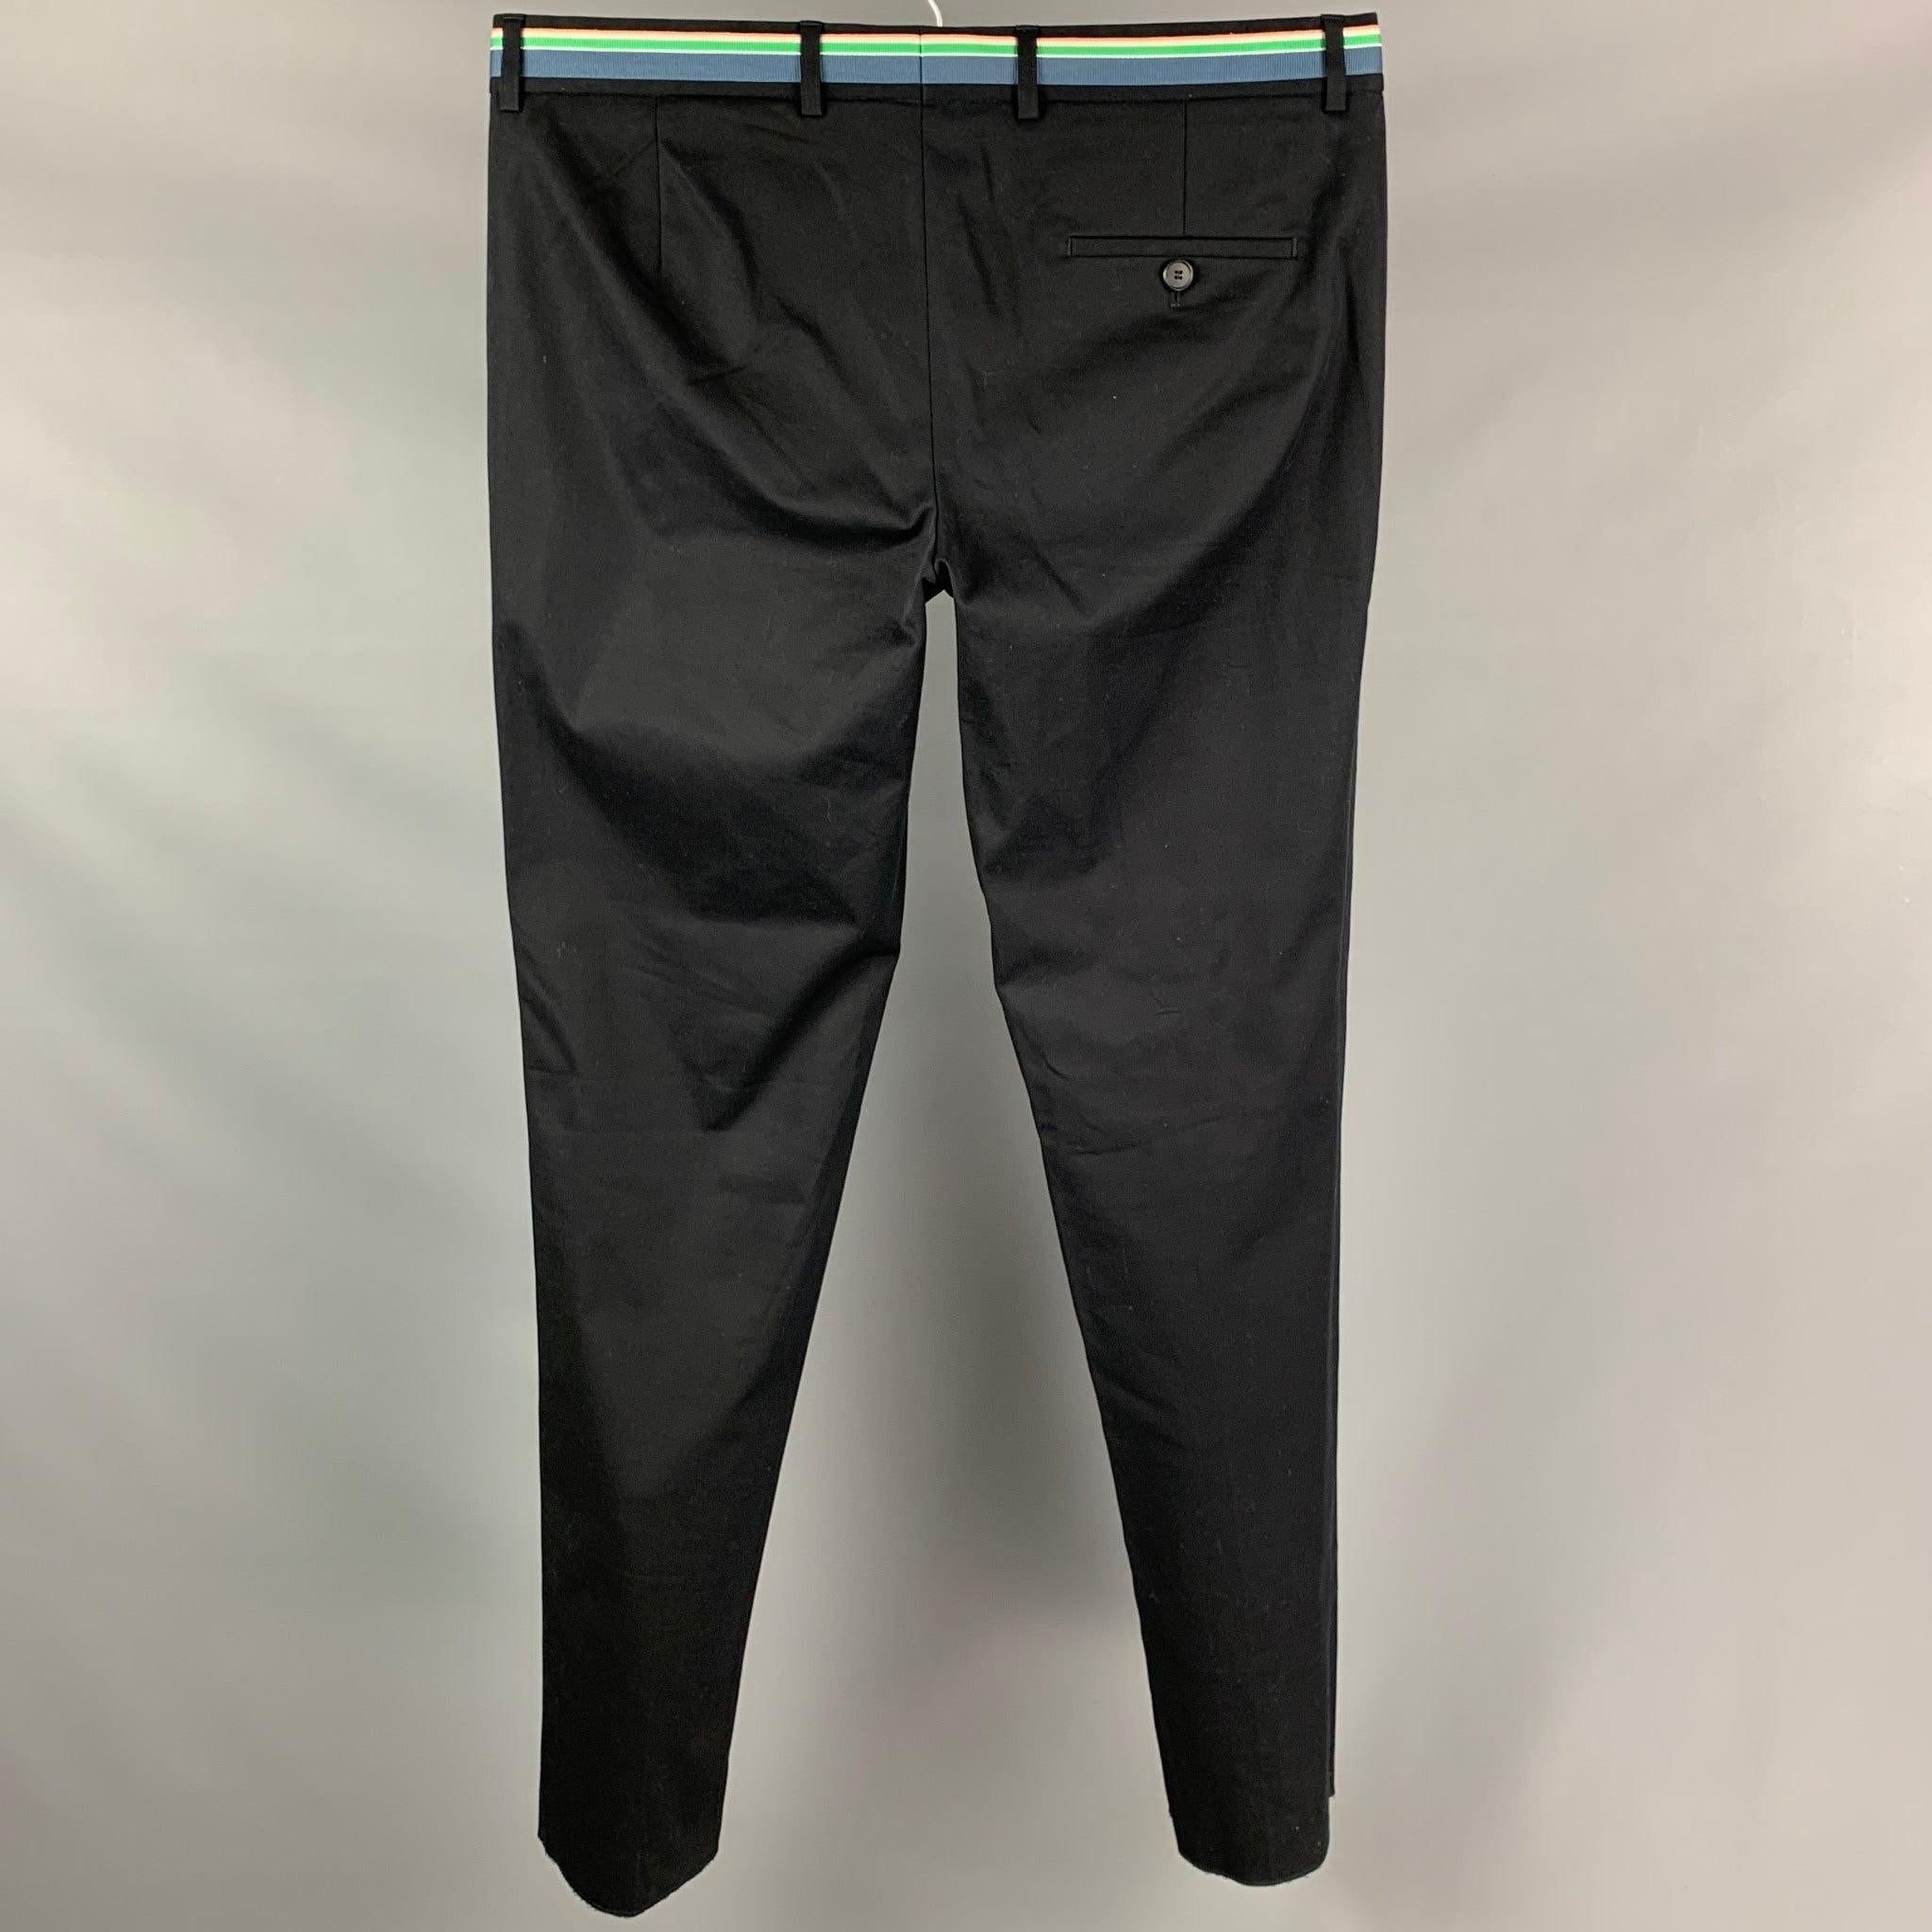 WALTER VAN BEIRENDONCK SS 17 dress pants comes in a black wool / polyester featuring a ribbon waistband design, flat front, front tab, and a zip fly closure.
Very Good
Pre-Owned Condition. 

Marked:   52 

Measurements: 
  Waist: 38 inches  Rise: 10